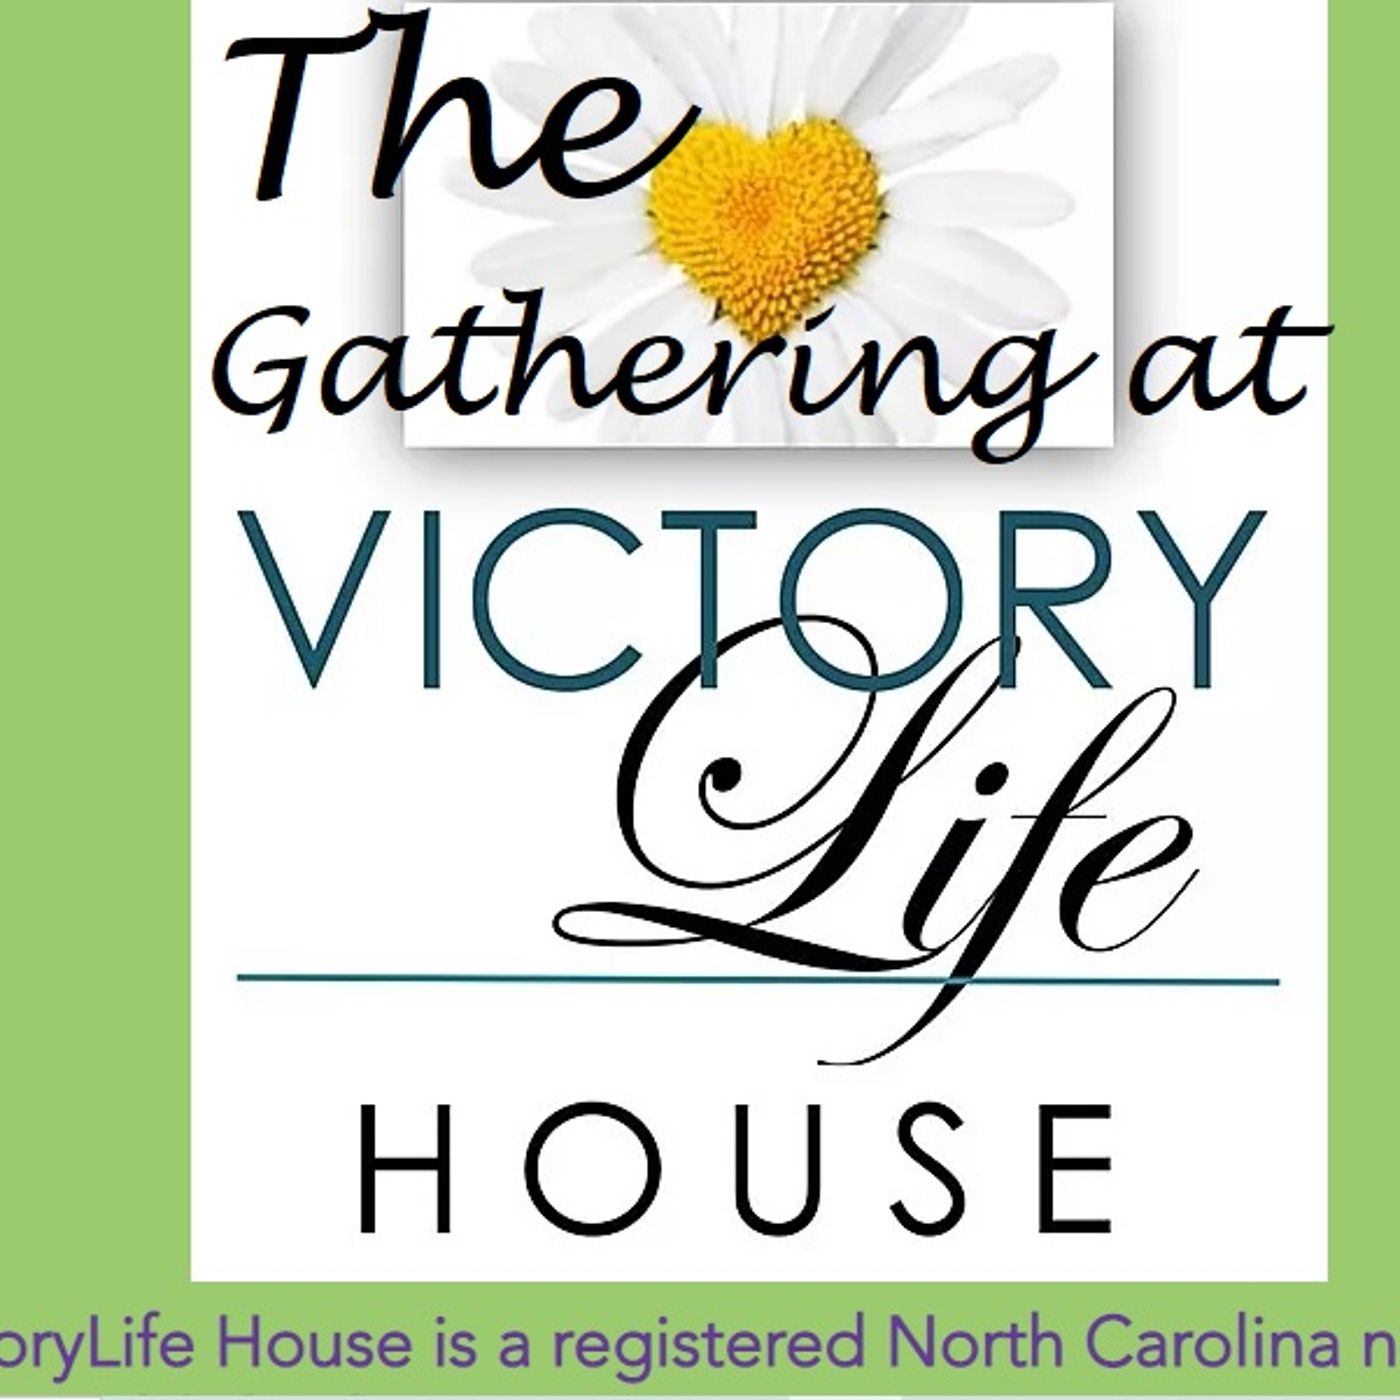 Shine Your Light #PODCAST #126 The Gathering @ Victory House